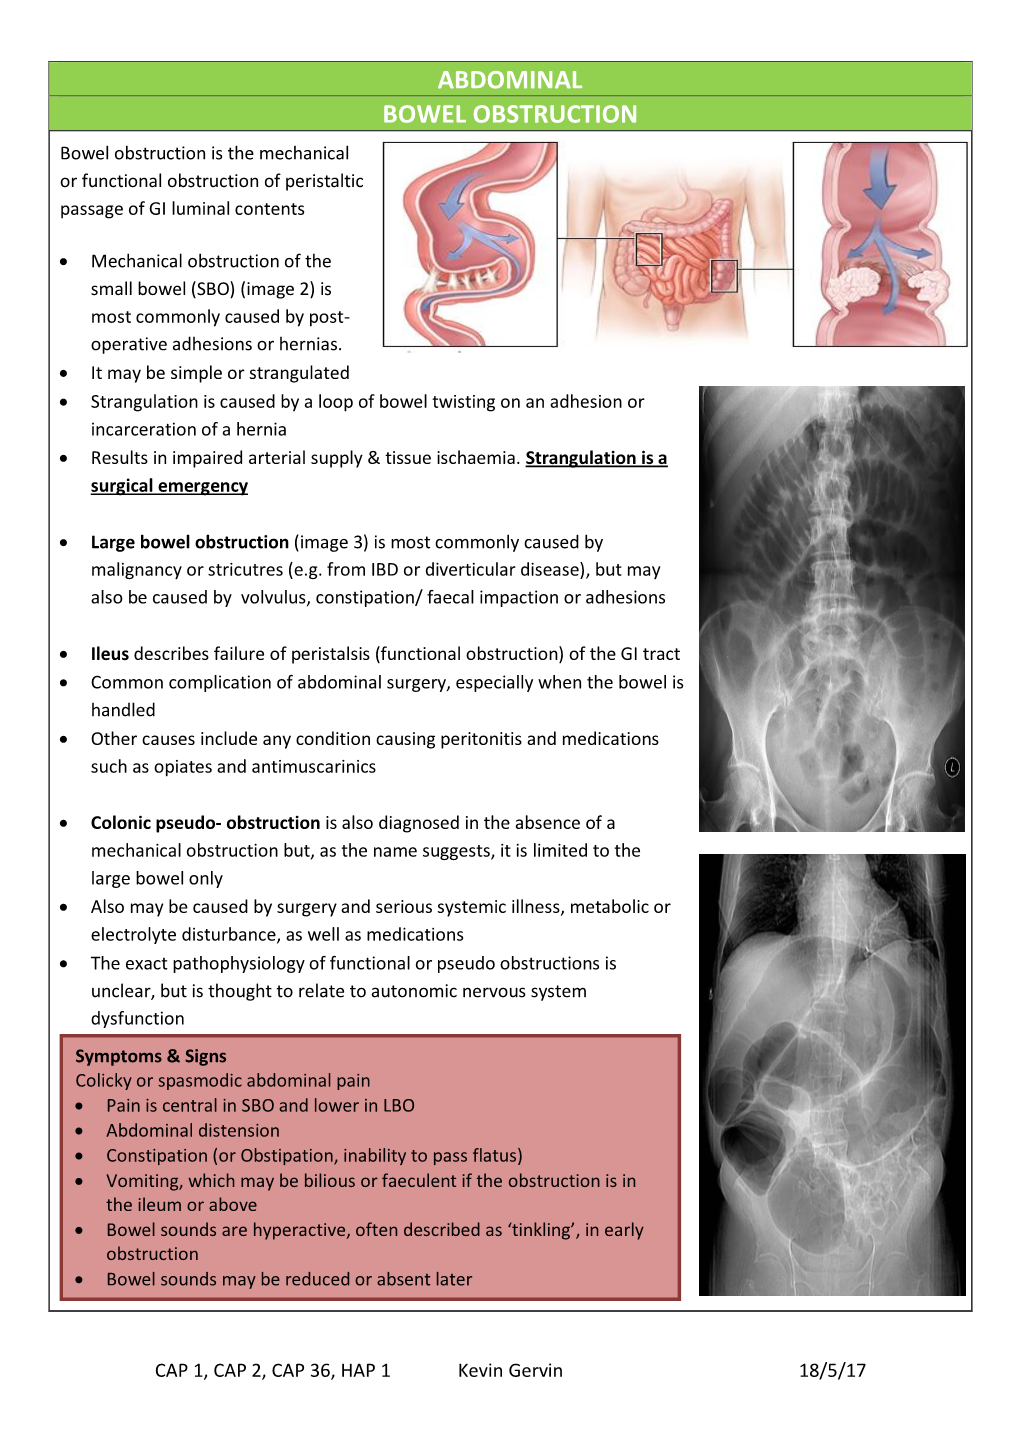 Abdominal Bowel Obstruction Bowel Obstruction Is The Mechanical Or Functional Obstruction Of Peristaltic Passage Of Gi Luminal Contents 